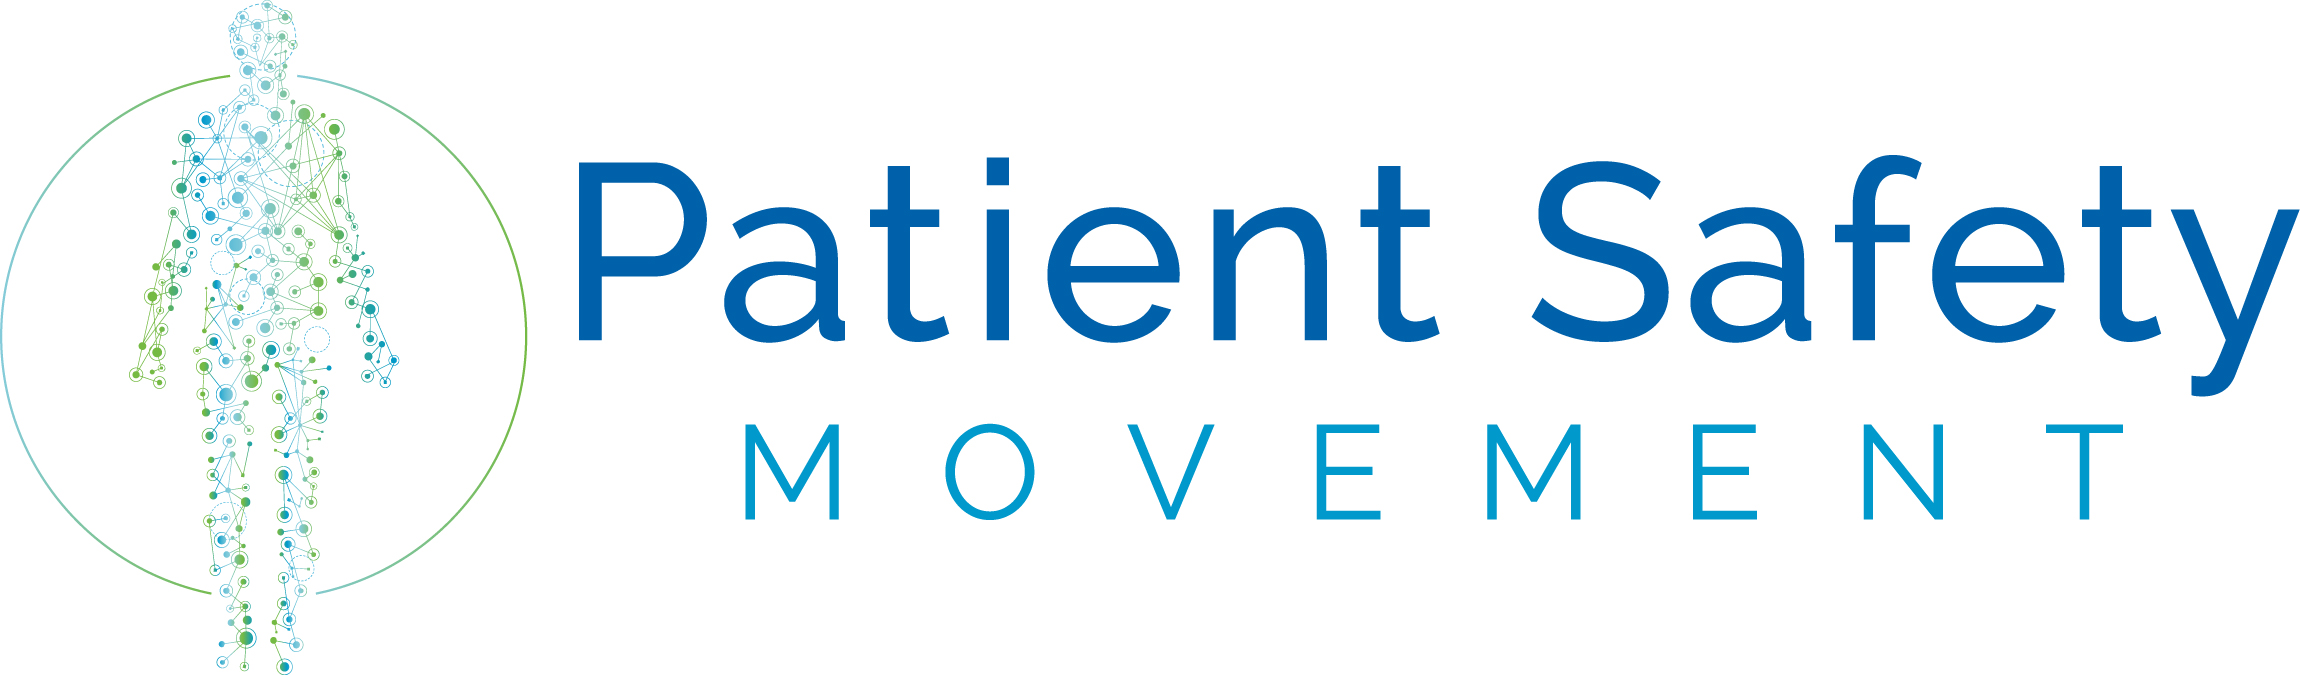 patient safety movement foundation logo